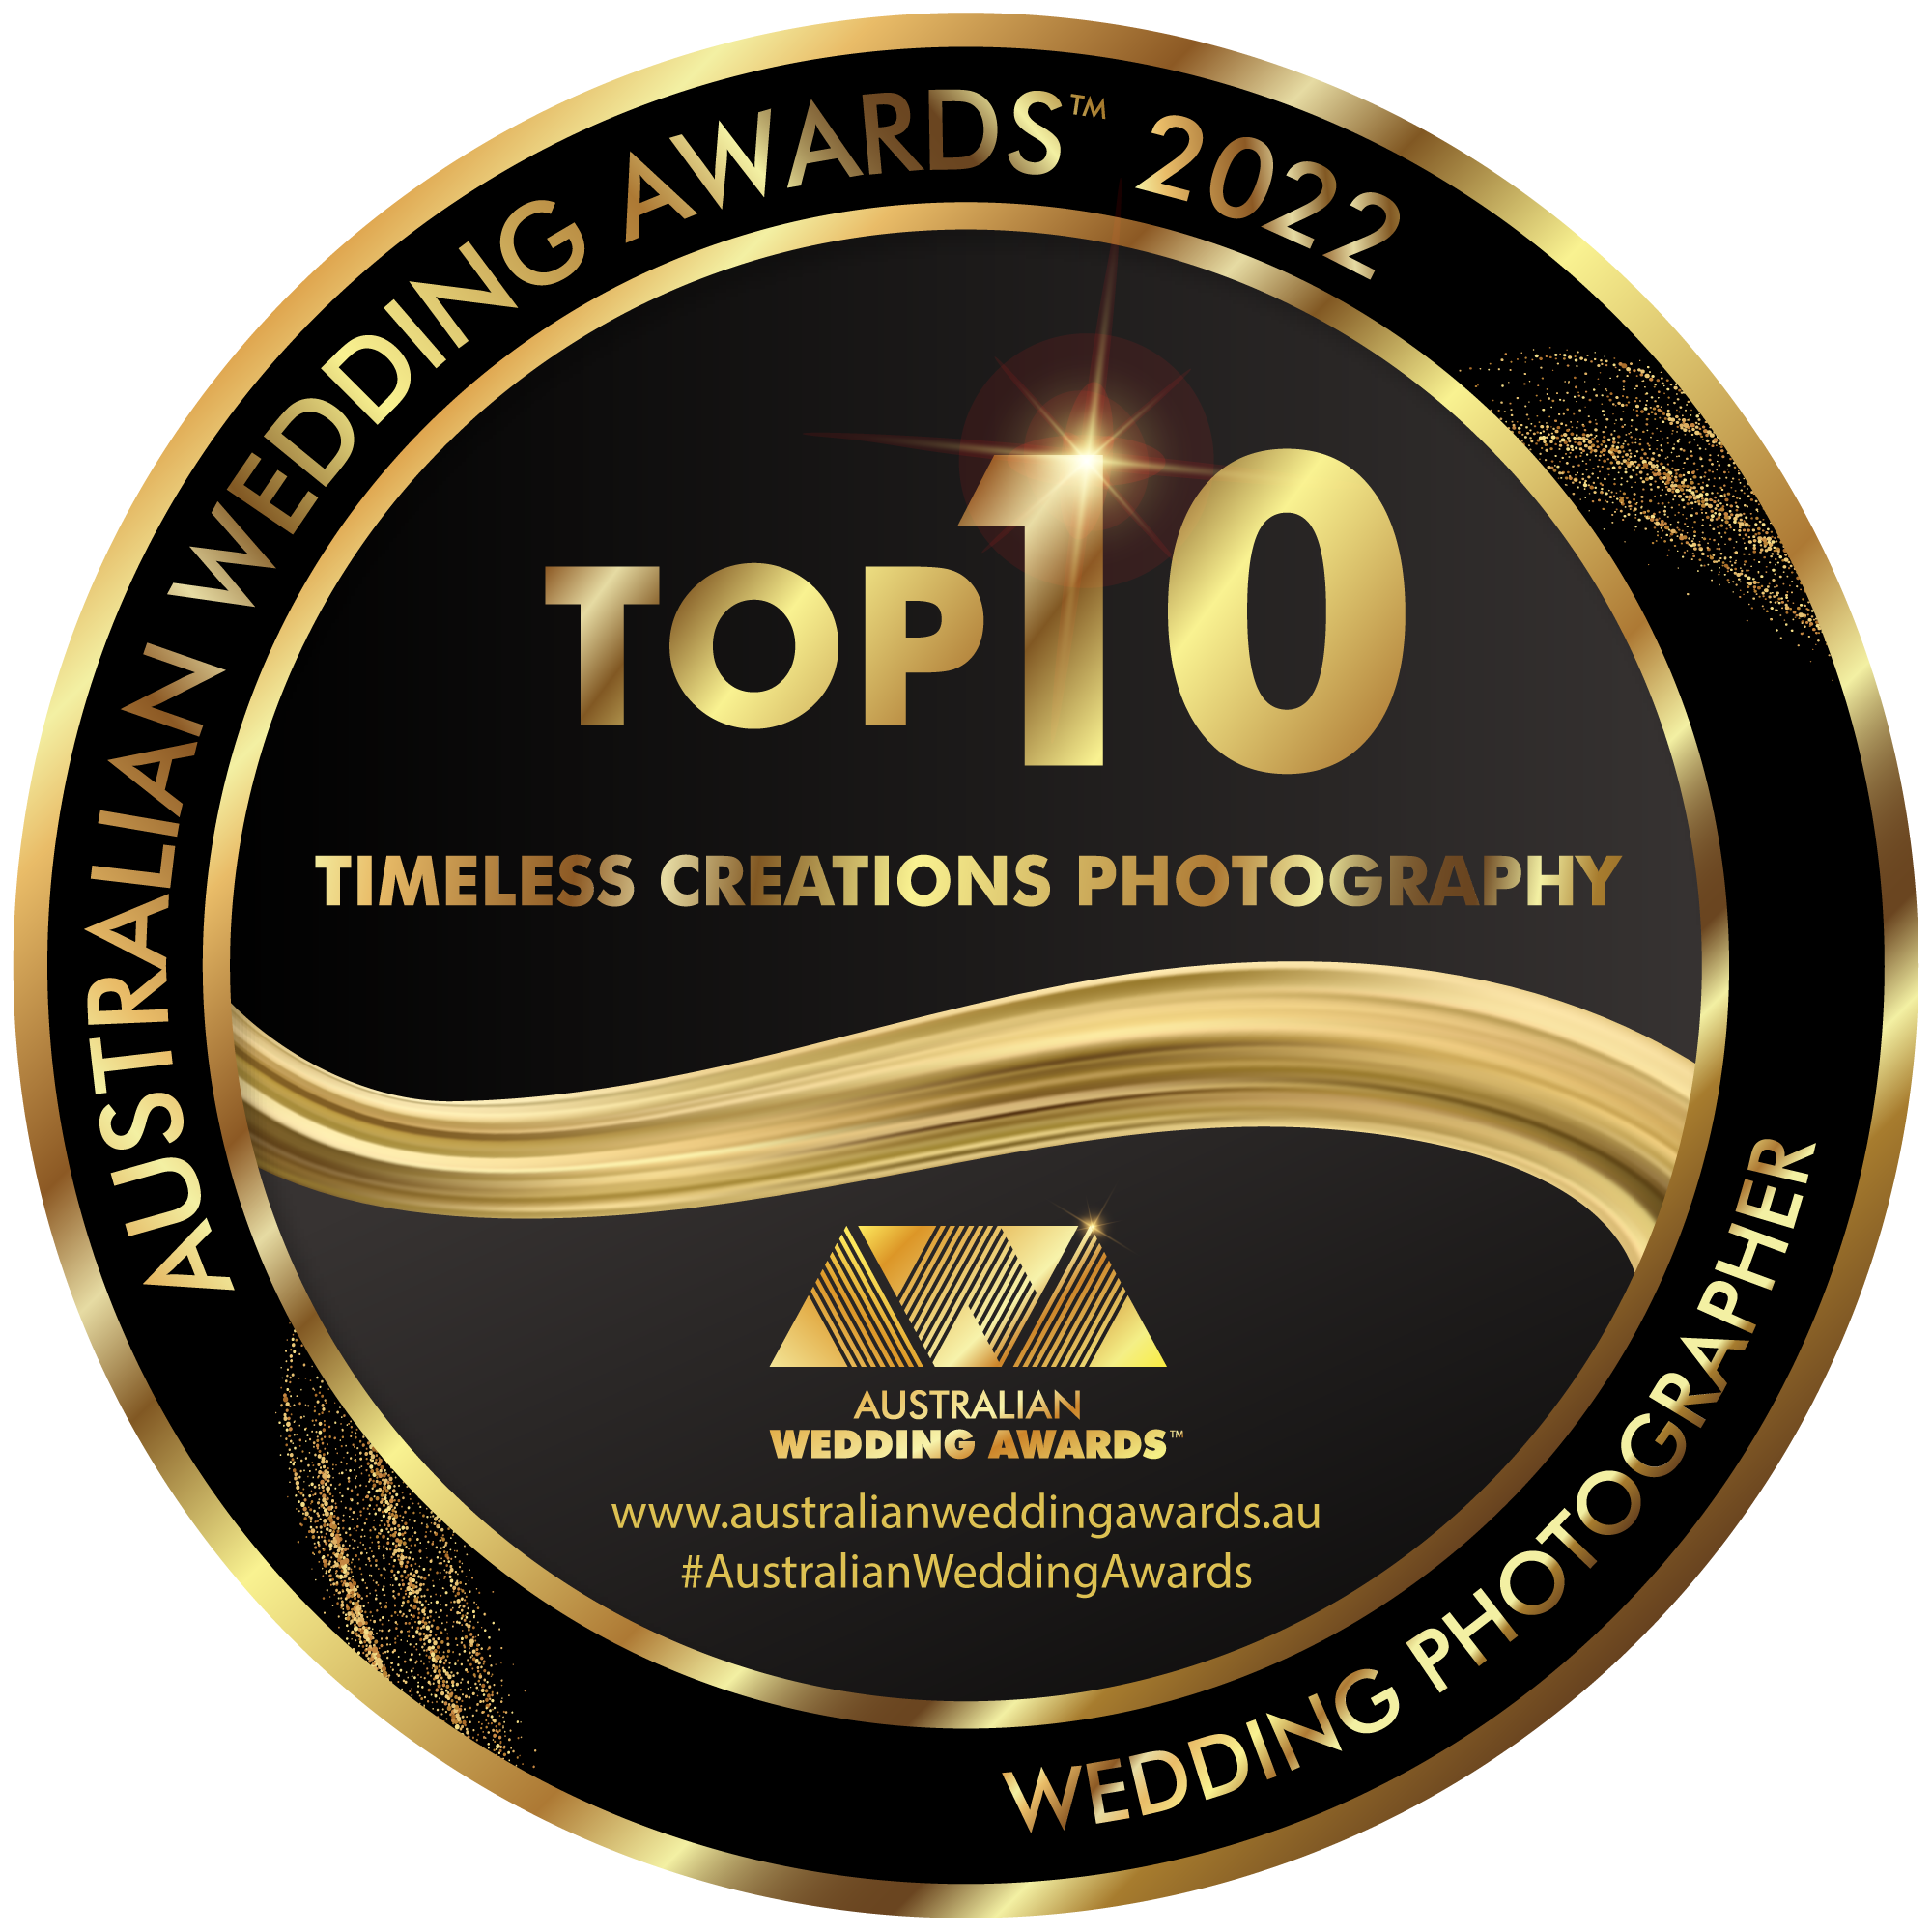 Timeless-Creations-Photography-AWA-Roundel2022-TOP10.png